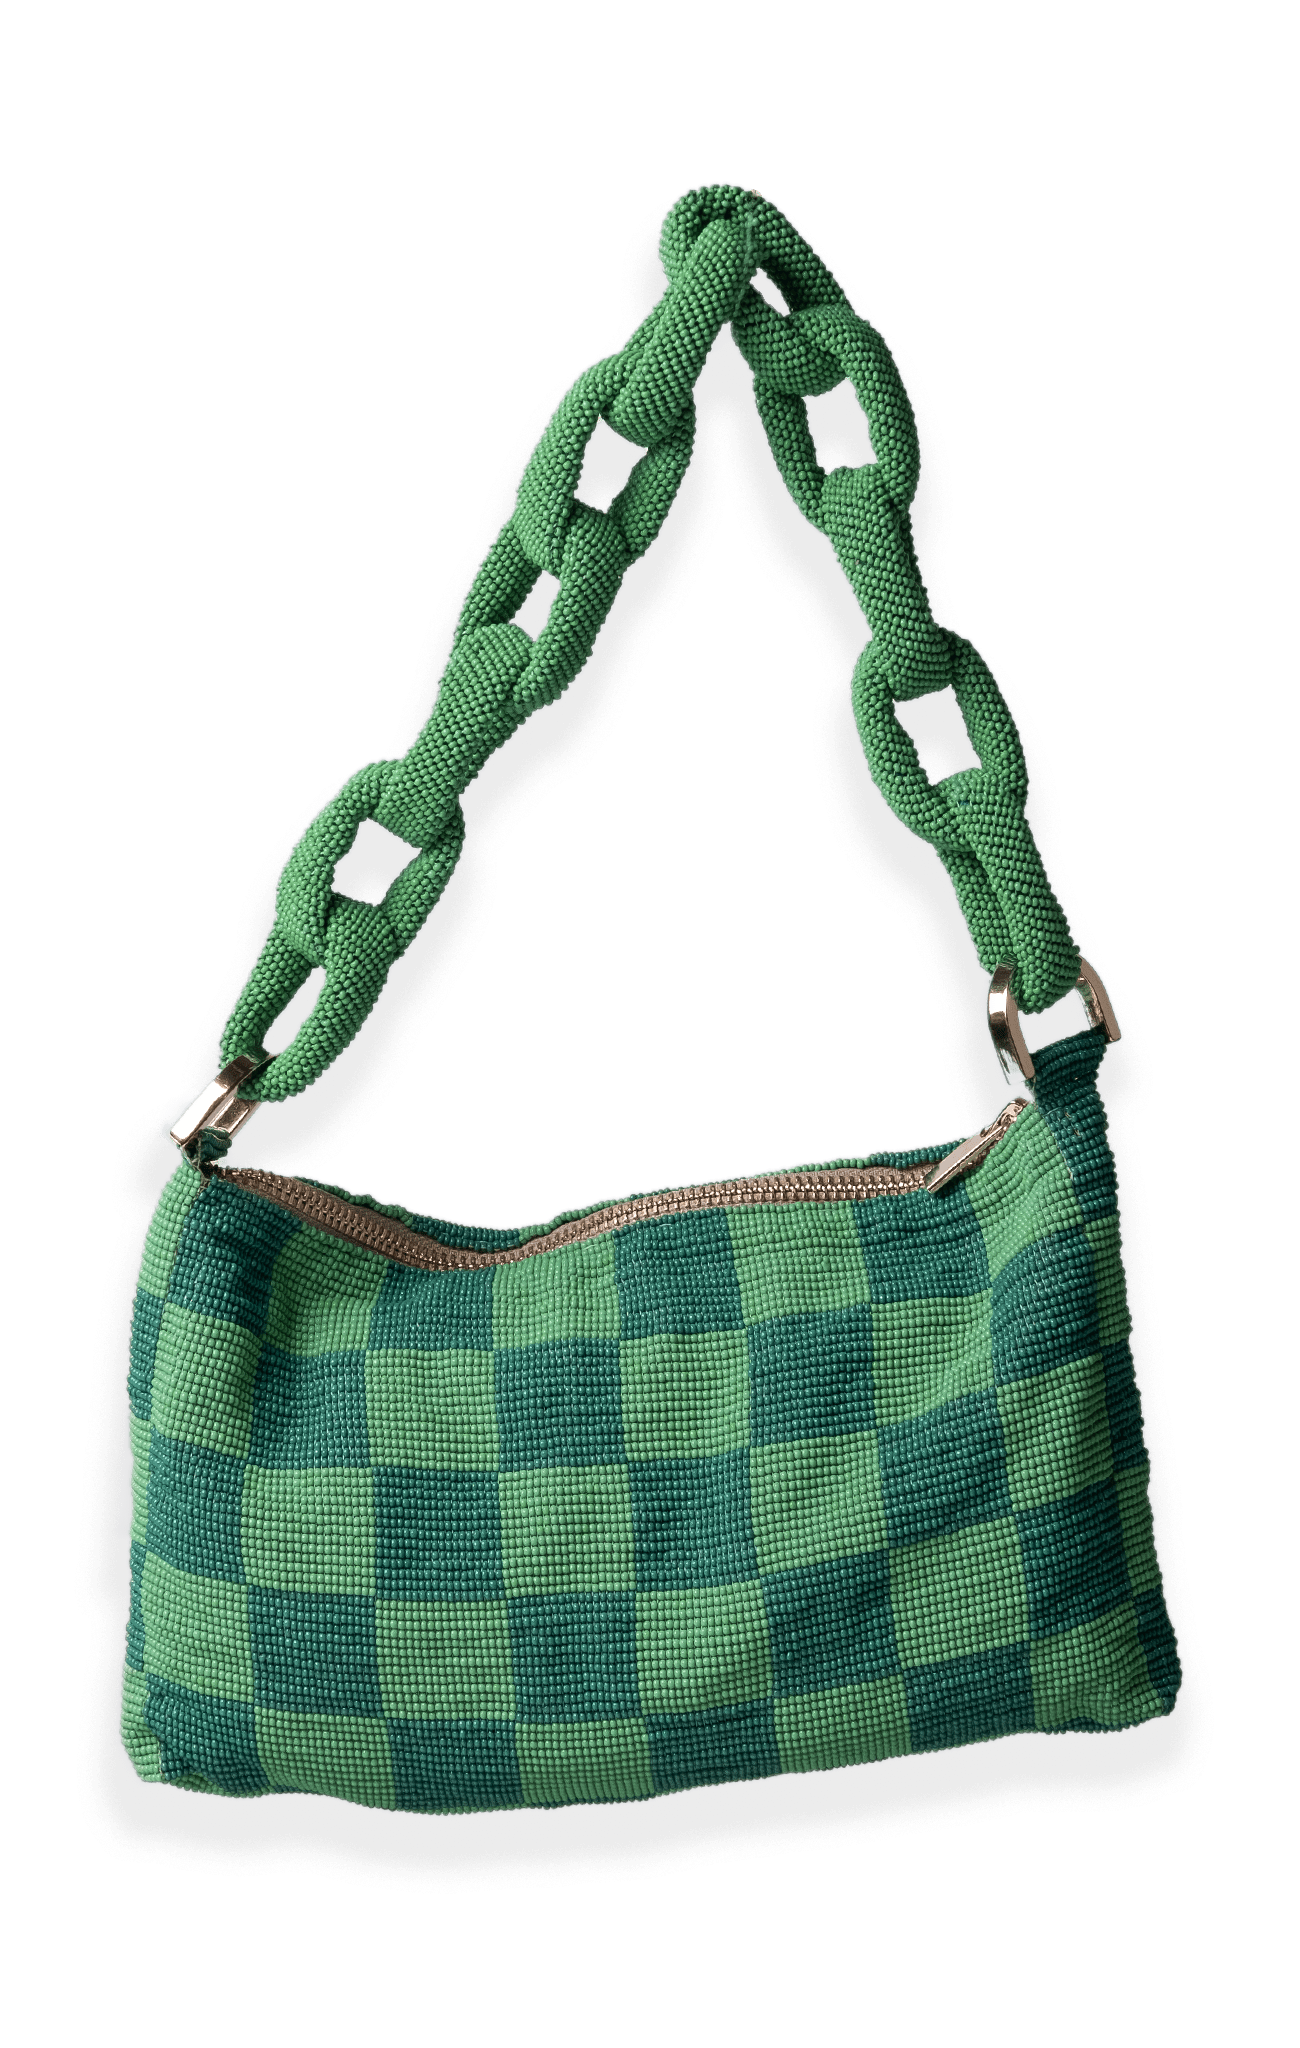 Crochet Louis Vuitton inspired Bag Strap Pattern - Lovely Loops by